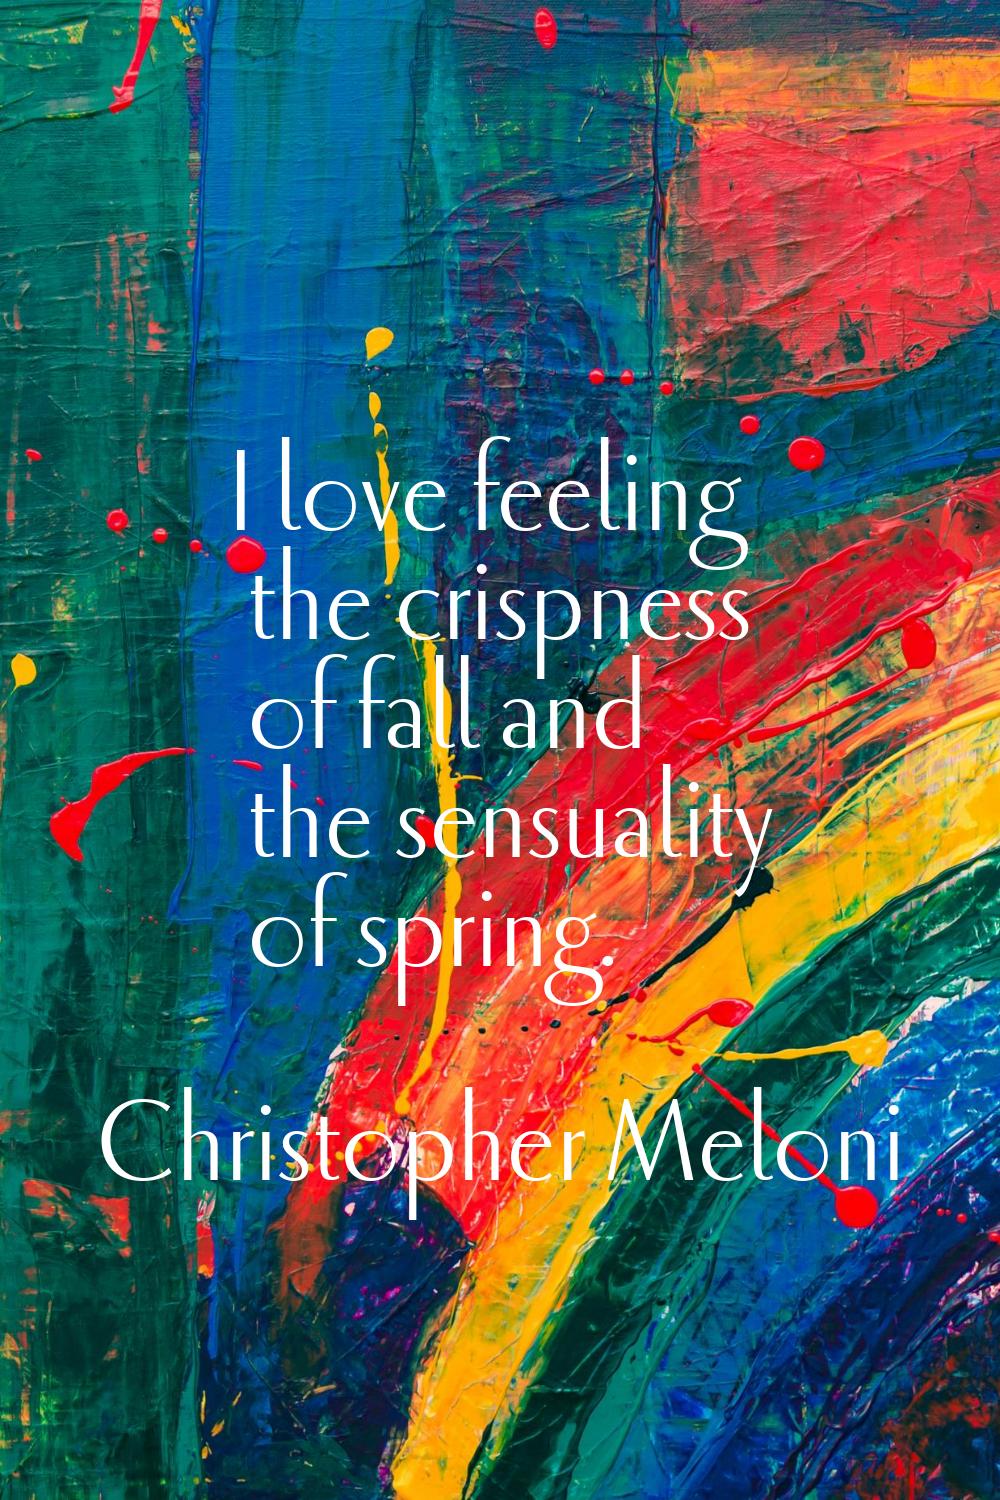 I love feeling the crispness of fall and the sensuality of spring.